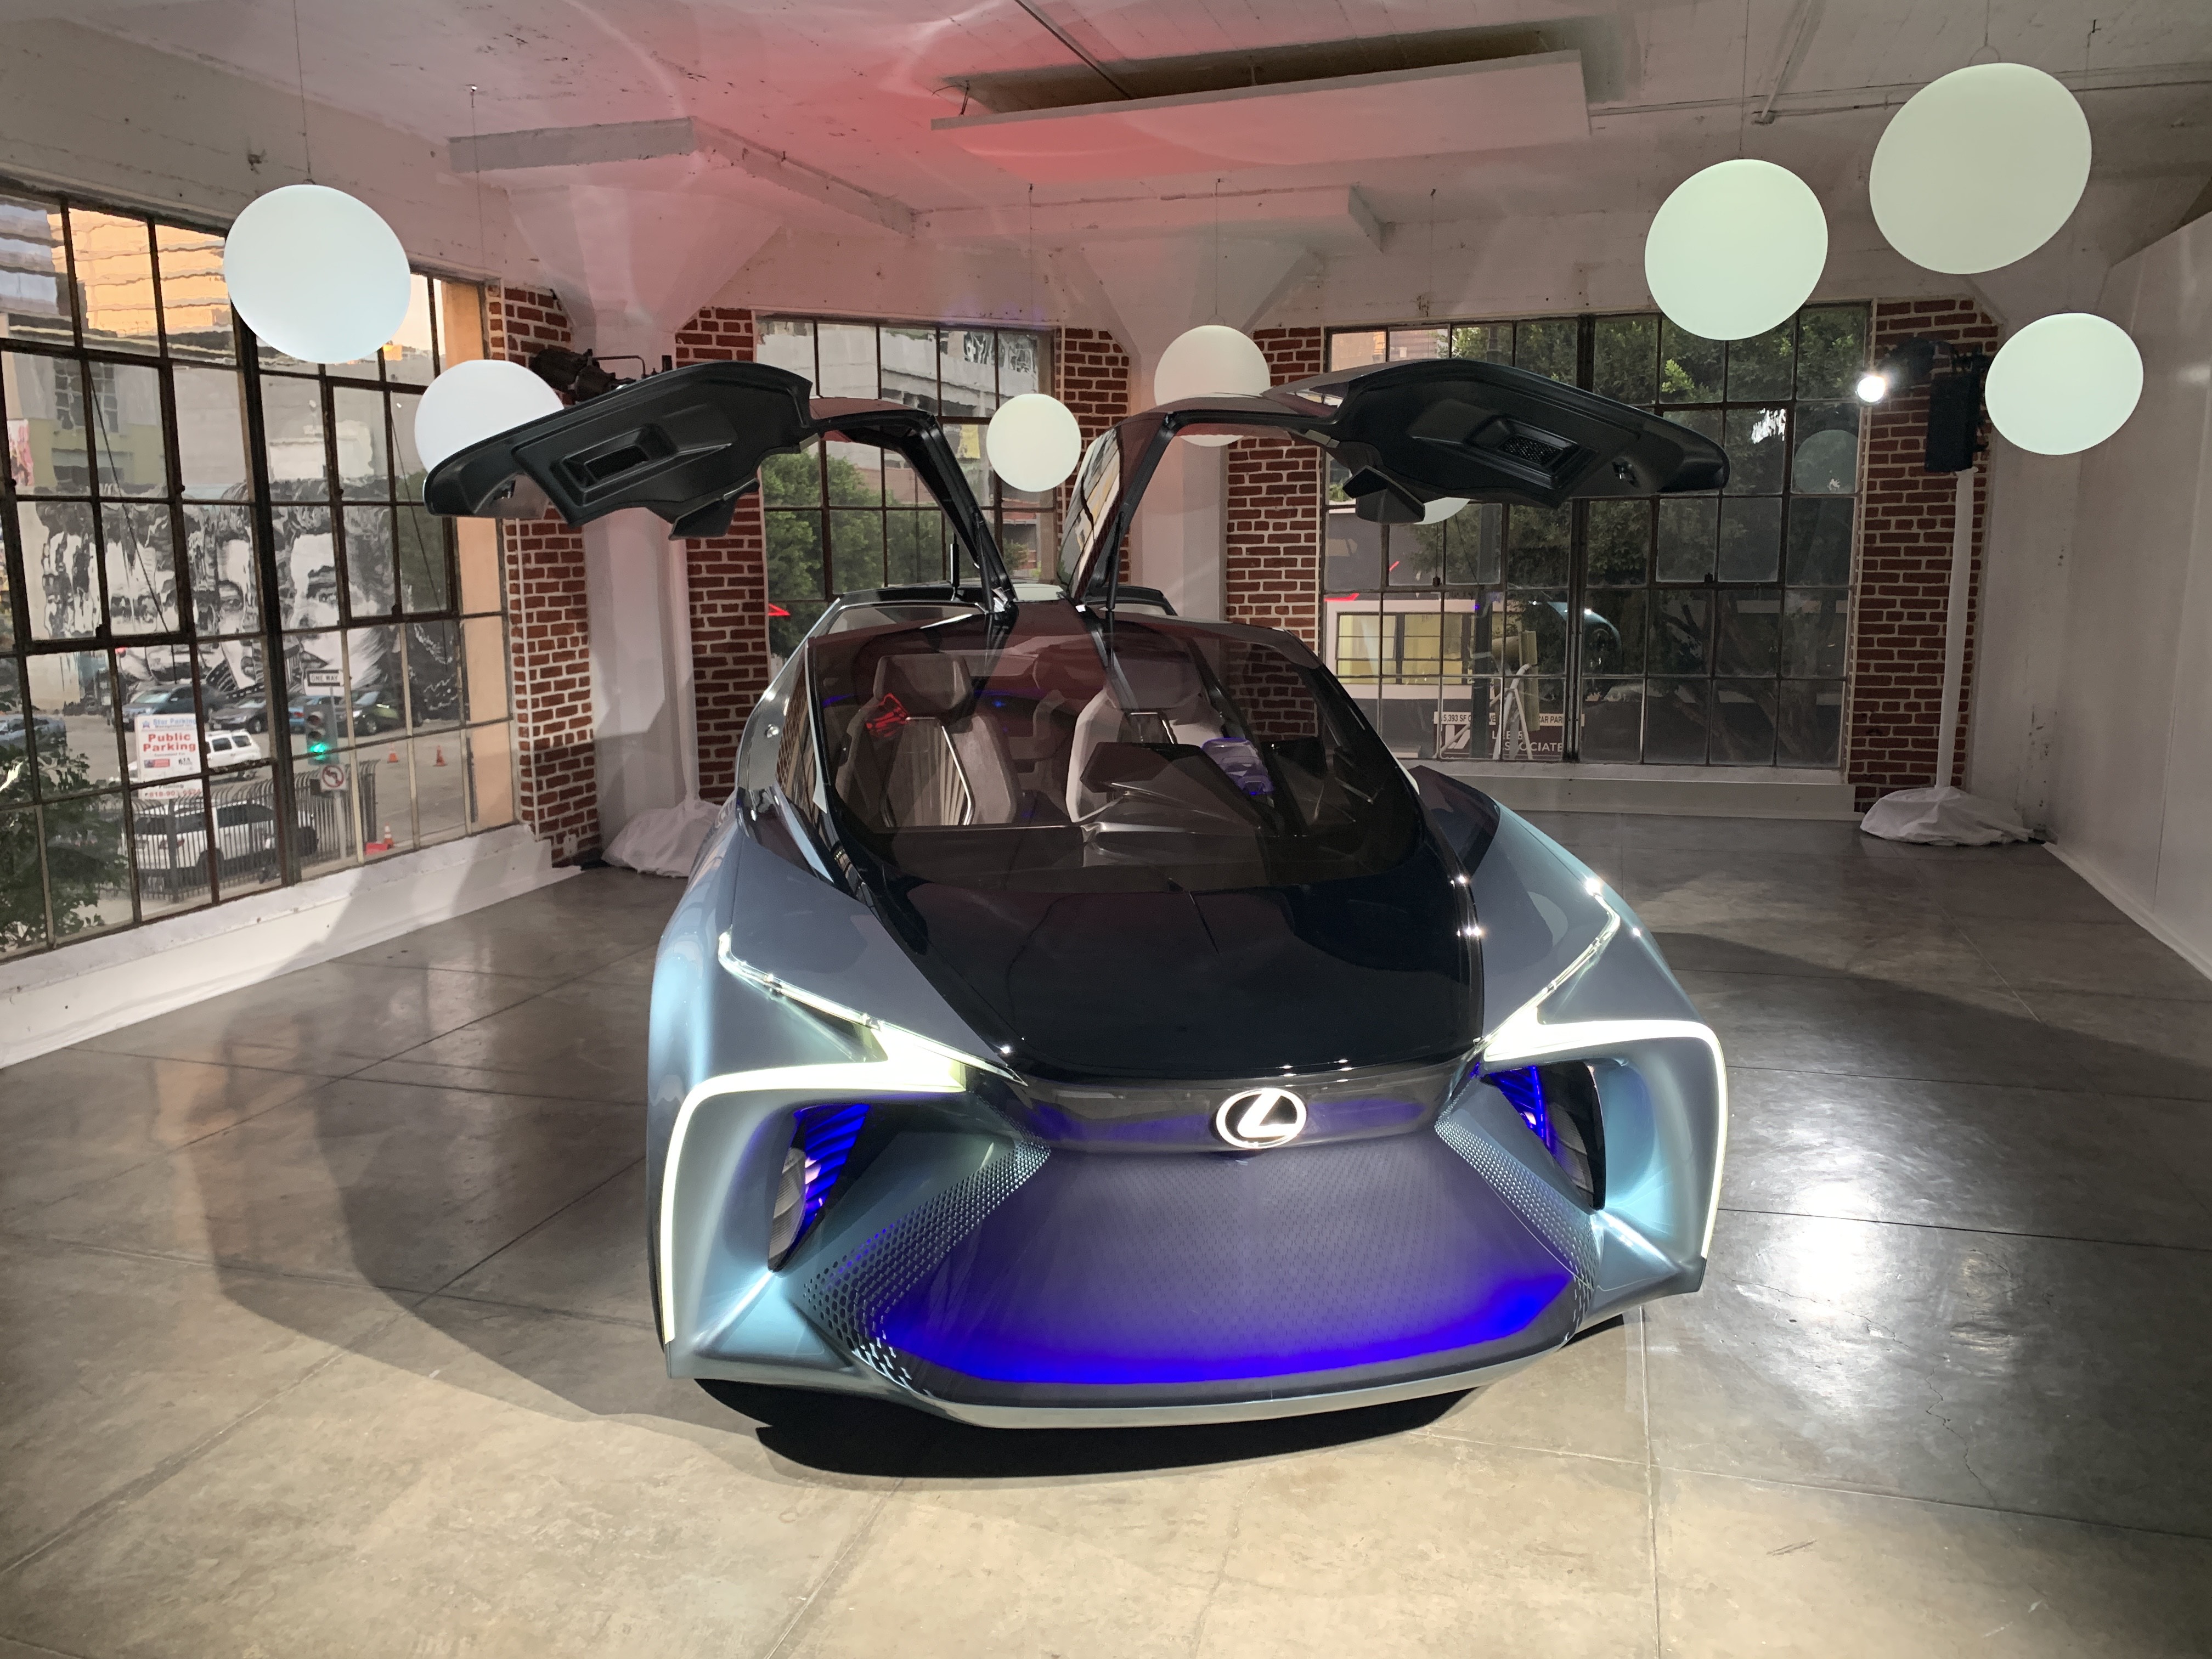 The Latest News from AutoMobility LA 2019